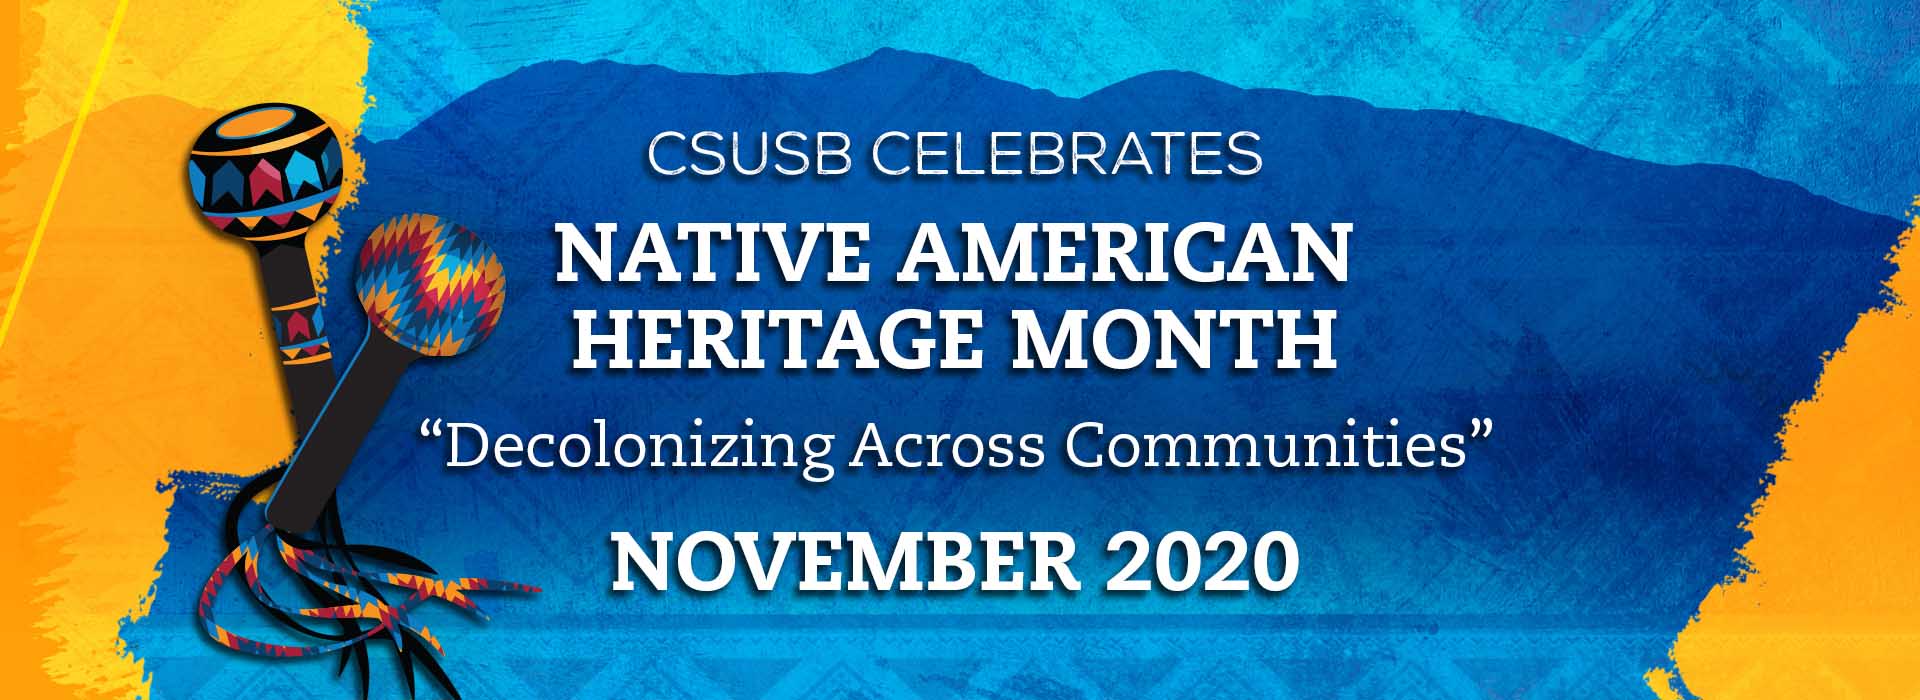 Native American Heritage Month web banner